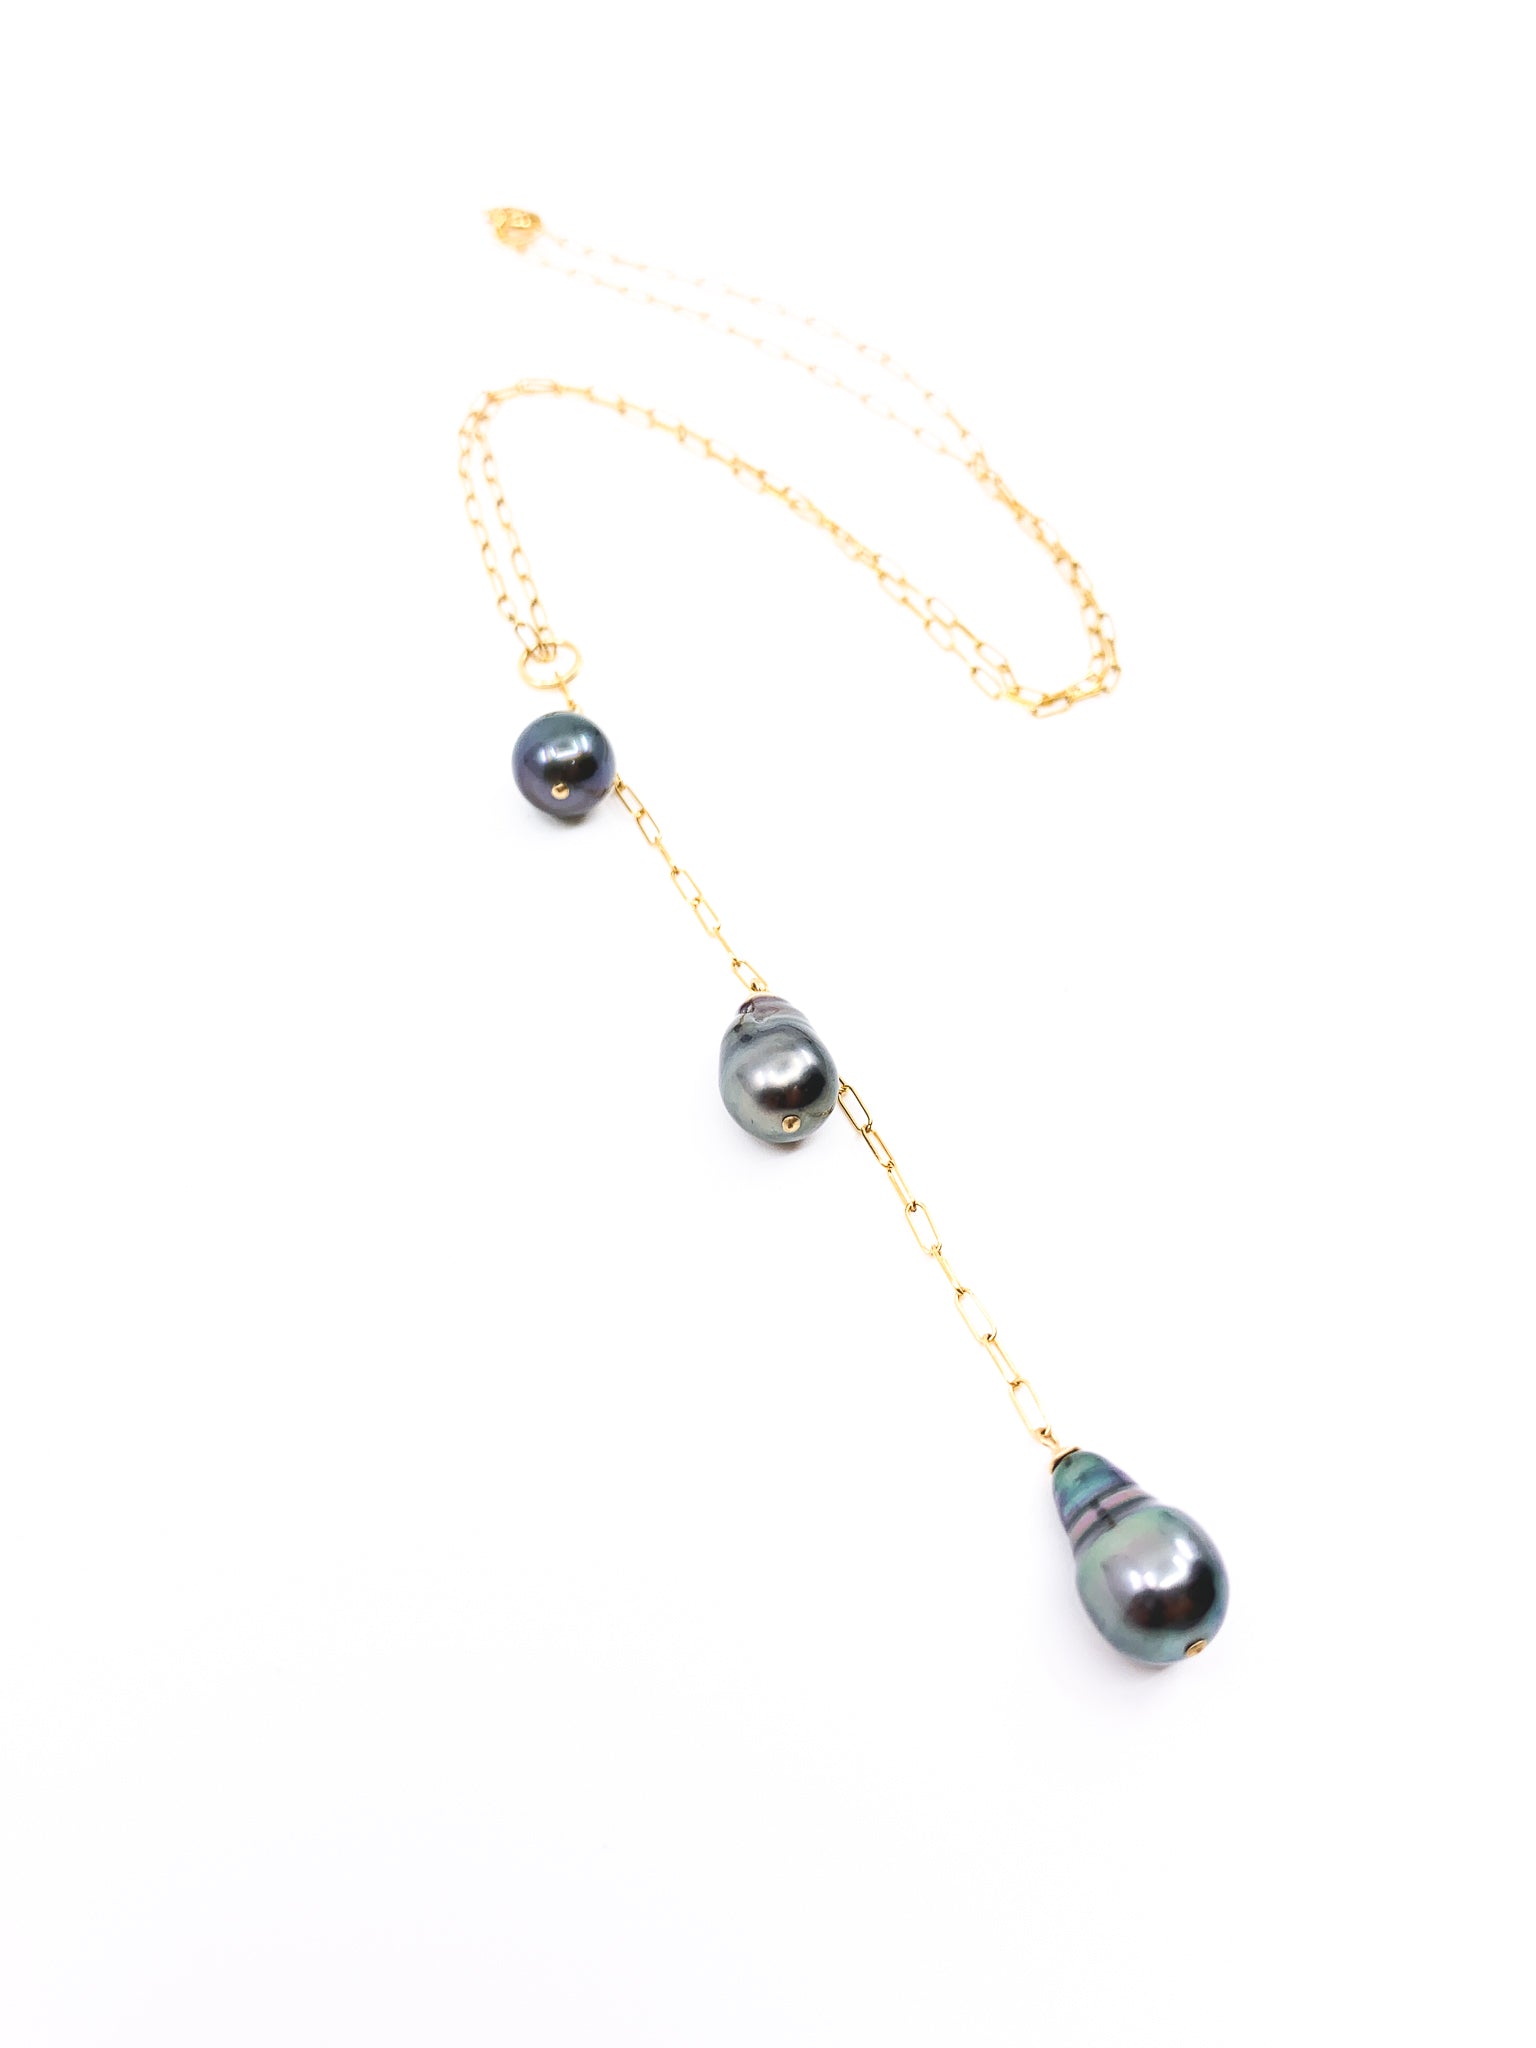 3 Tahitian pearls waterfall necklace by eve black jewelry made in Hawaii